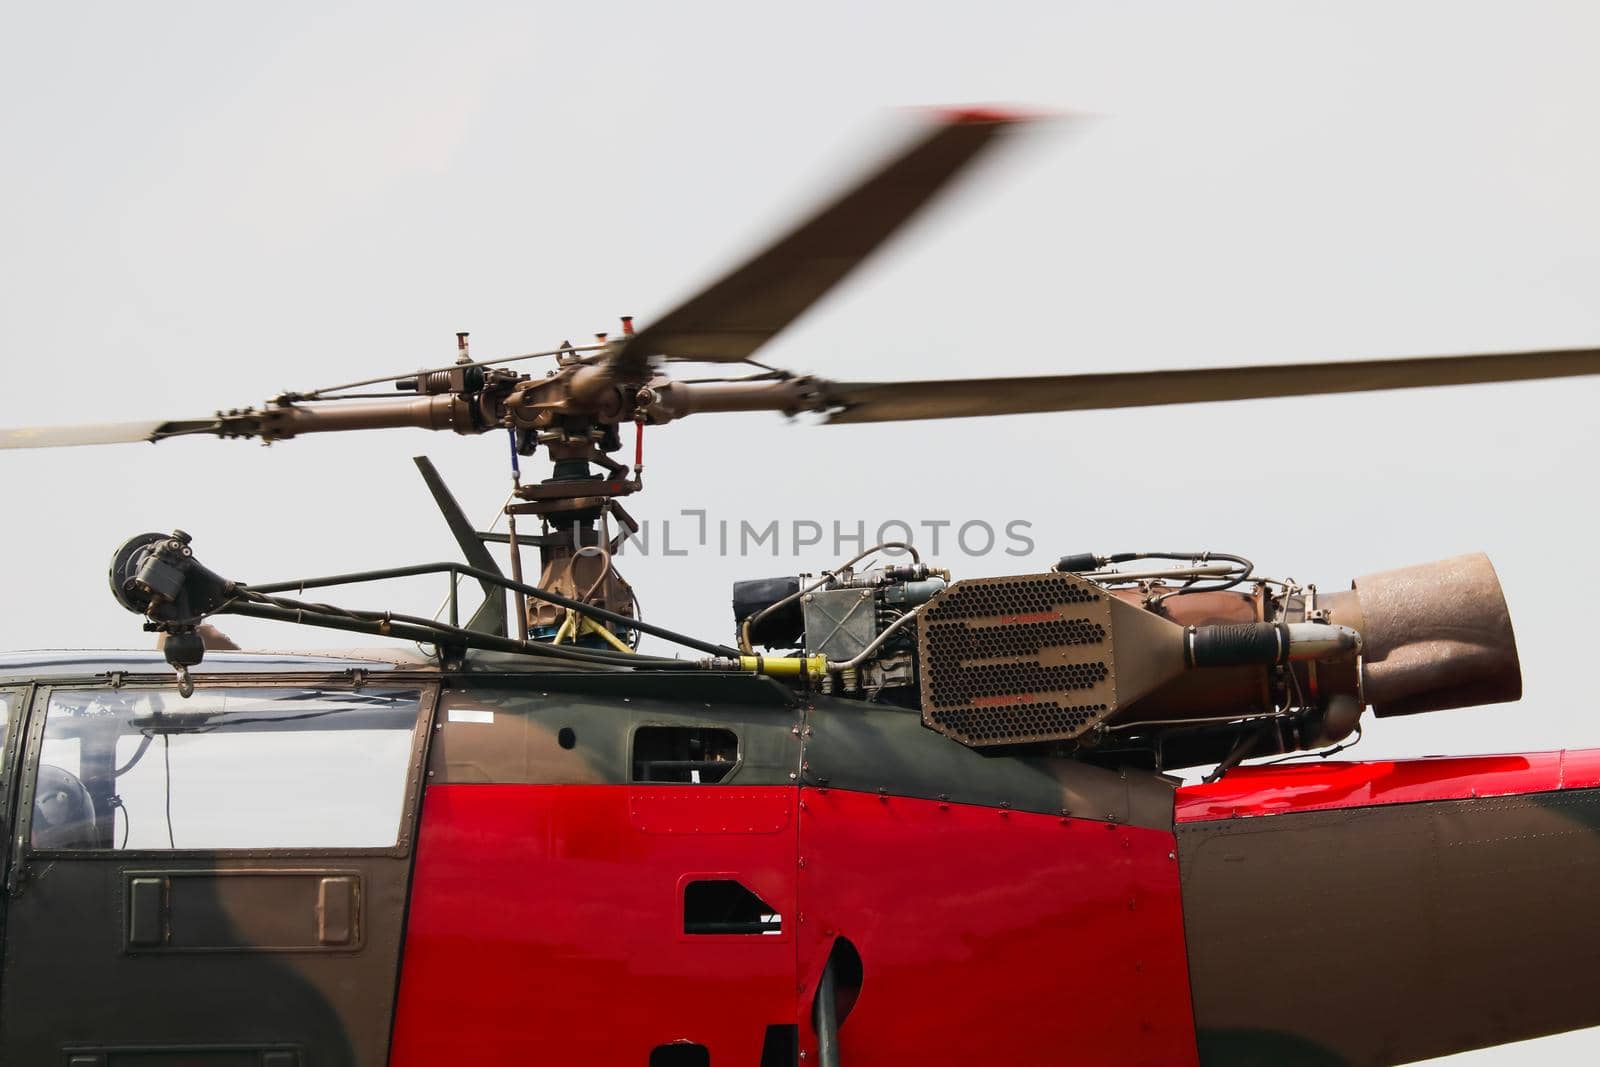 Light military utility helicopter engine with cable hoist and spinning rotor close-up, South Africa